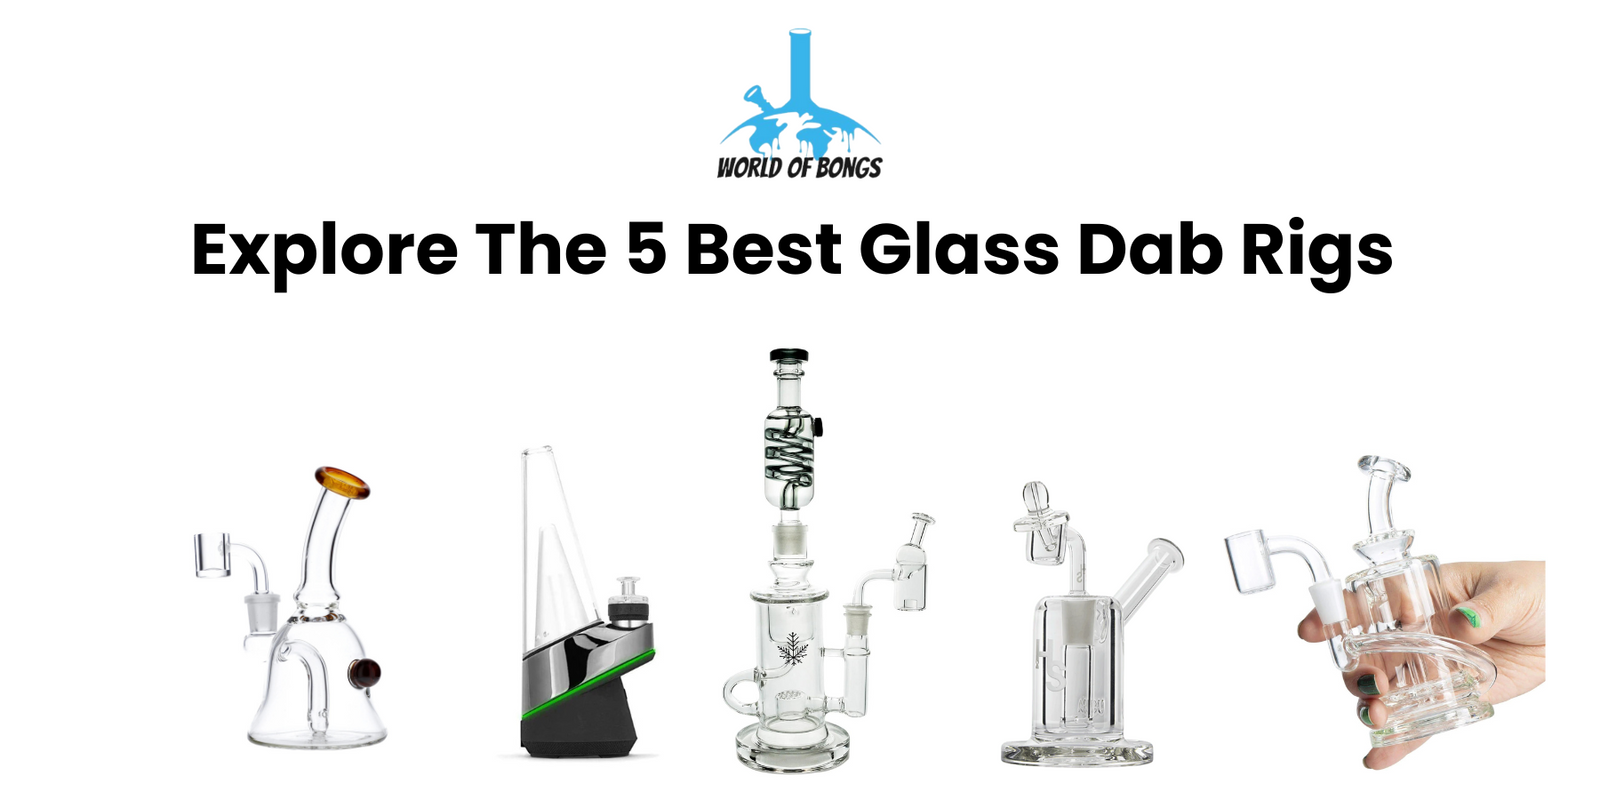 5 Best Glass Dab Rigs  Wax and Dabbing Rigs - World of Bongs